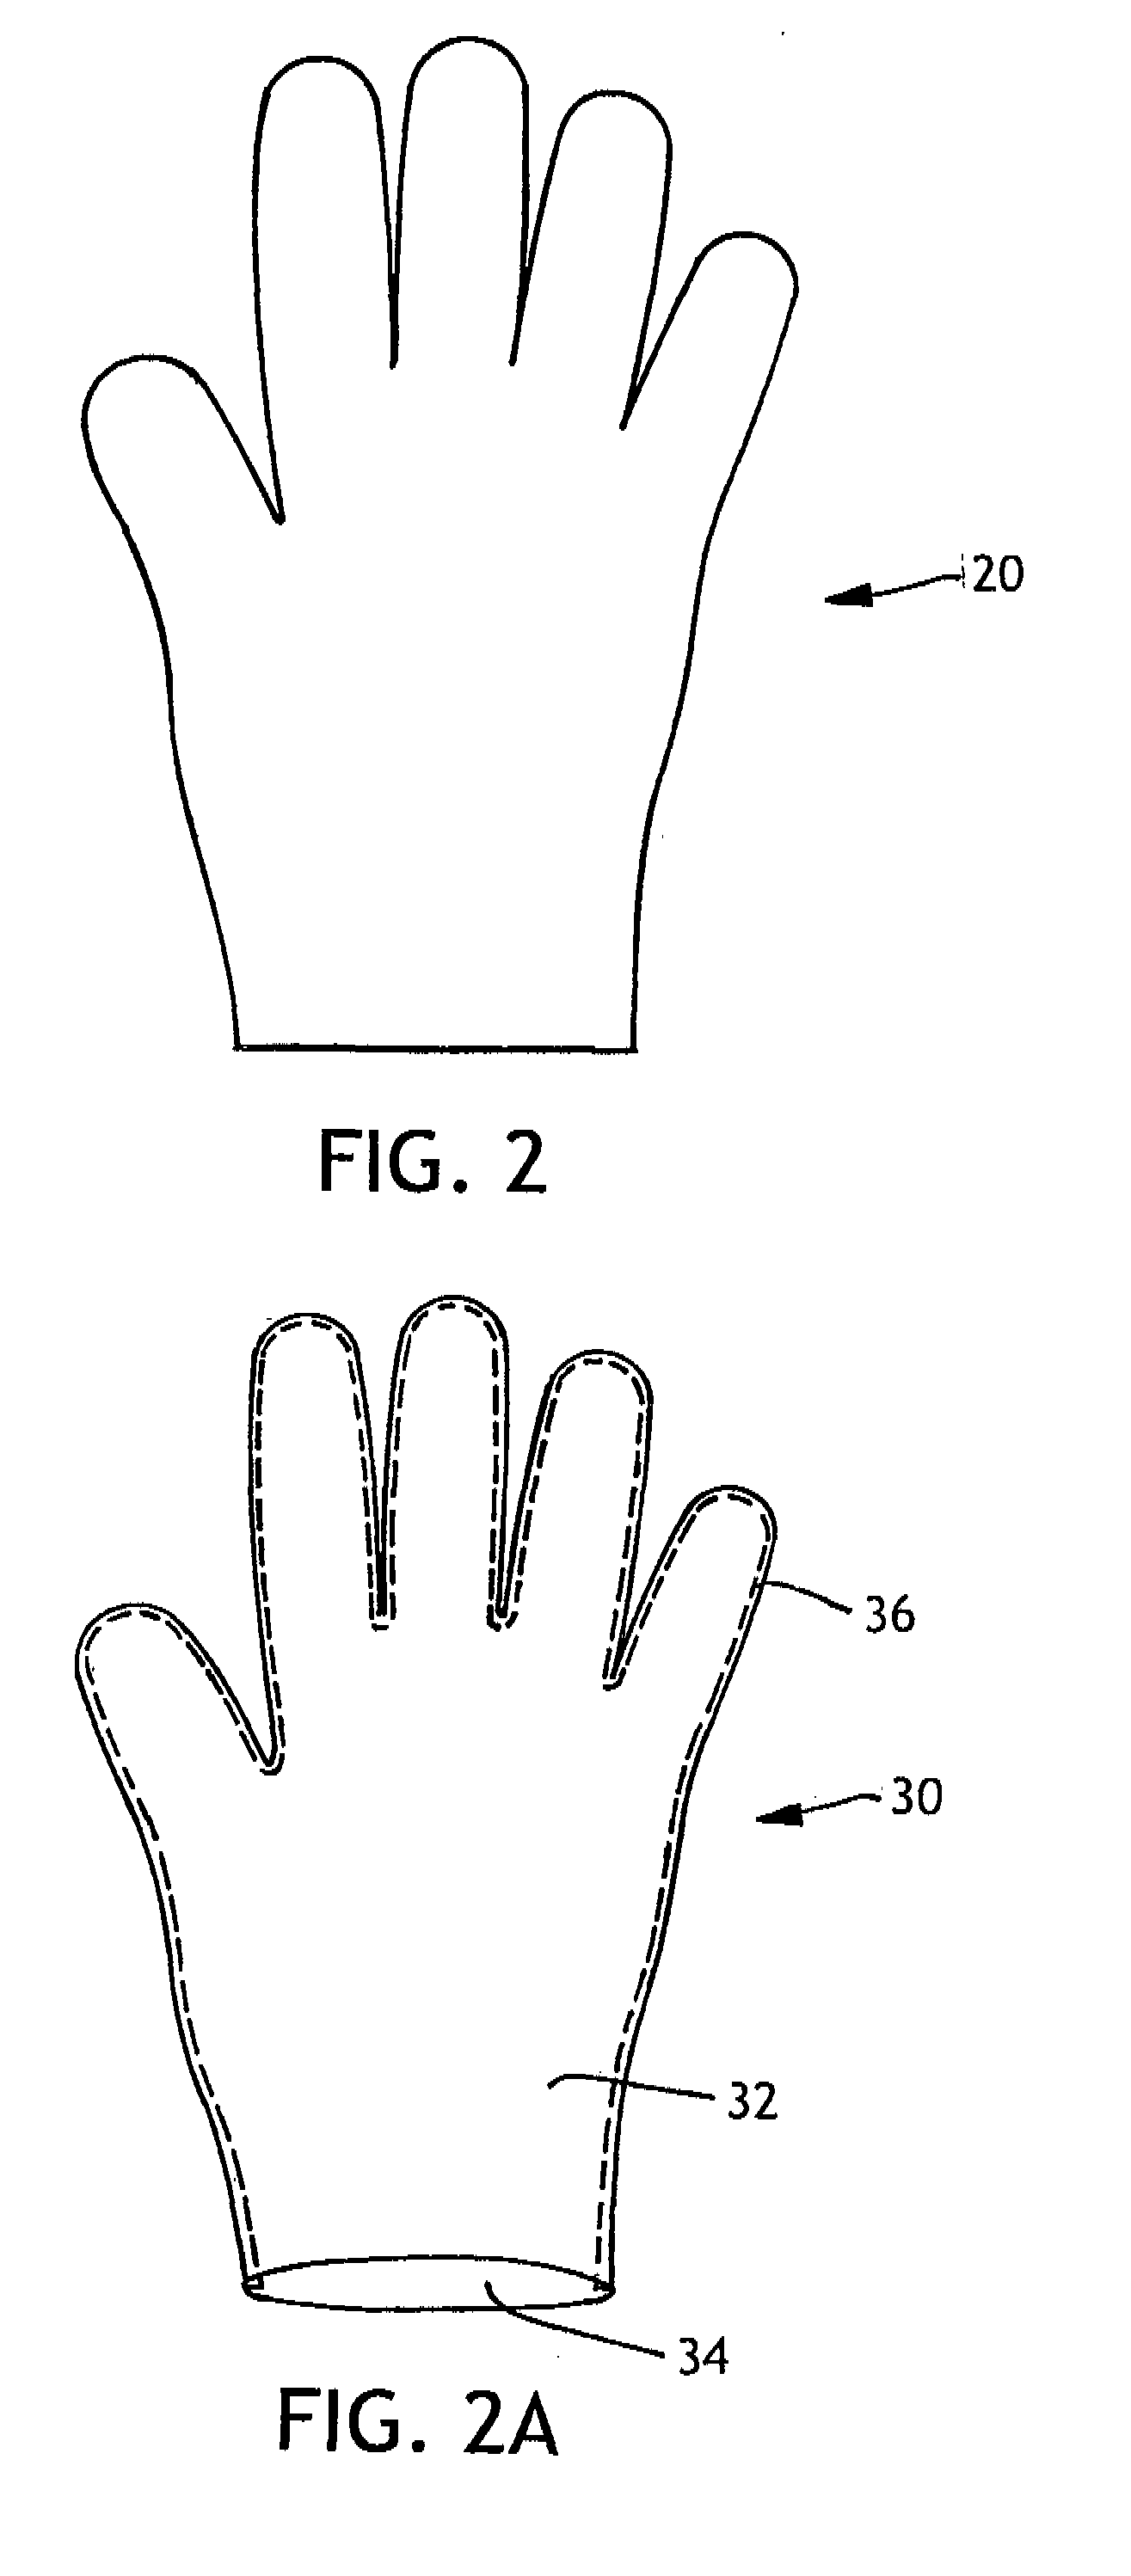 Substrates having formulations with improved transferability